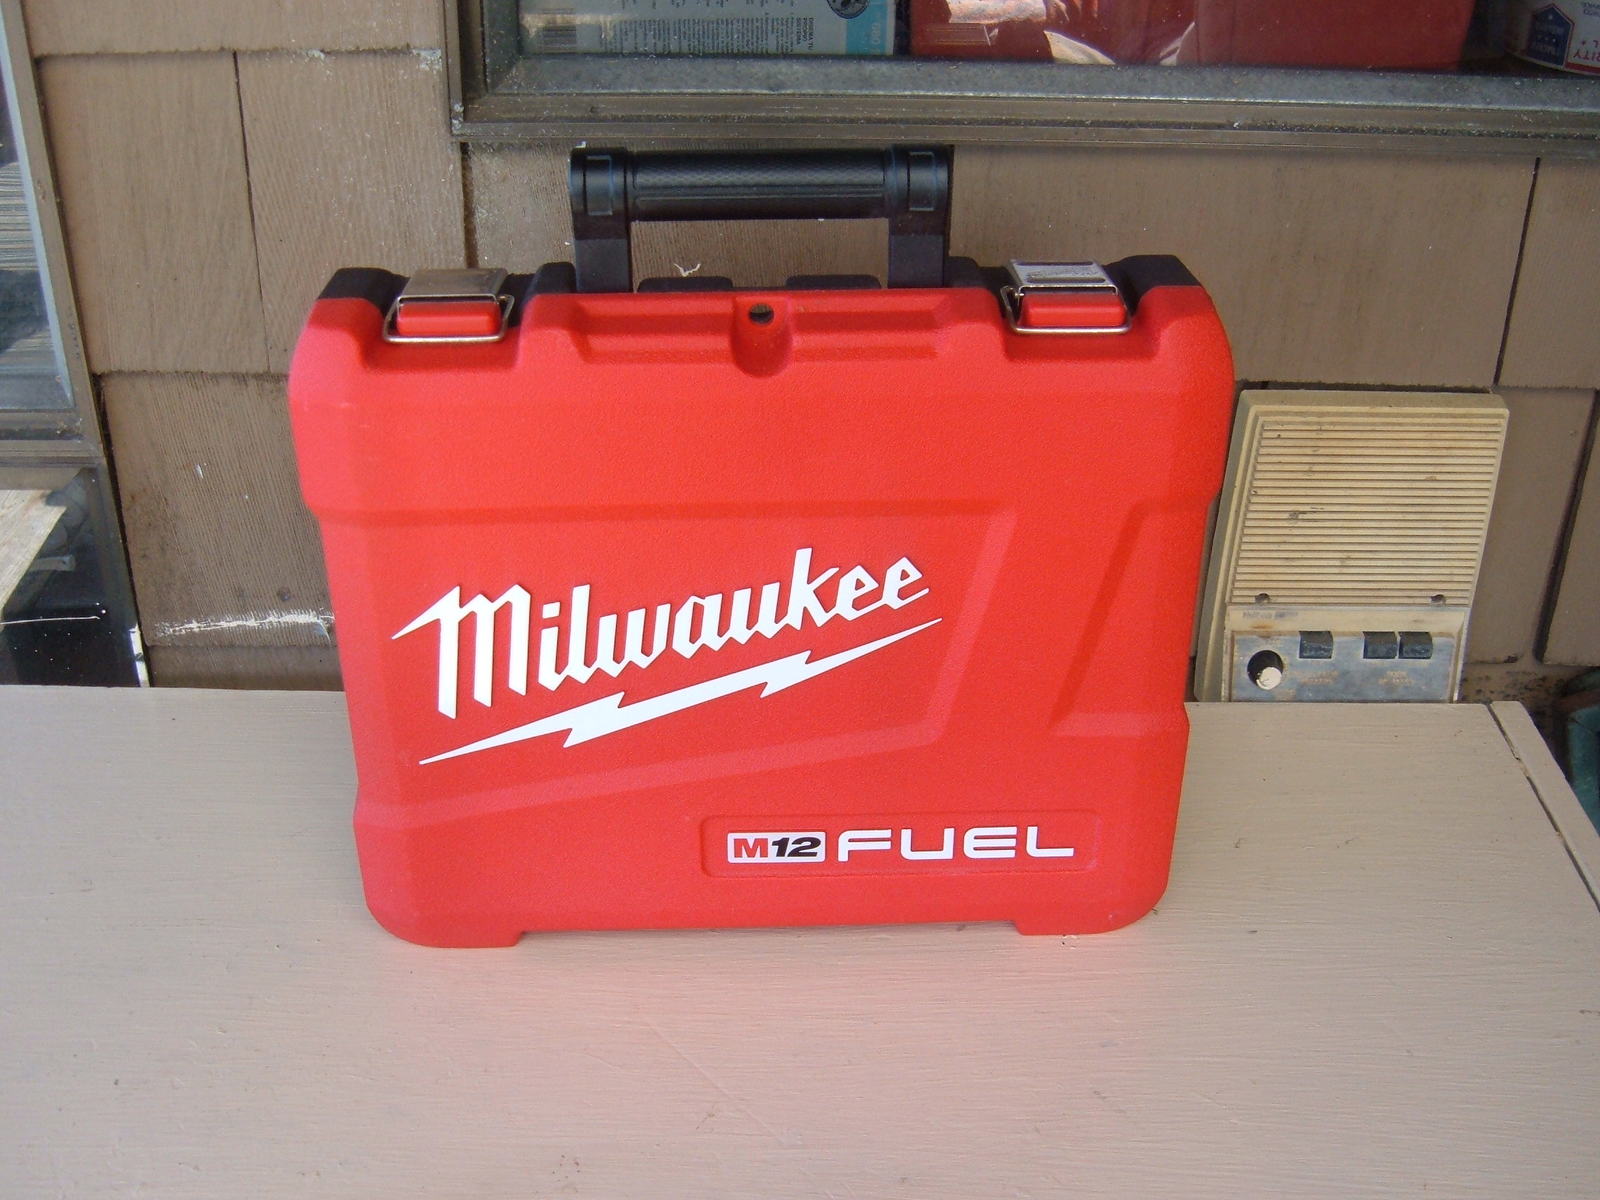 Milwaukee M12 Fuel 2403-22 1/2" Drill-driver Empty Case only. New. - $18.00